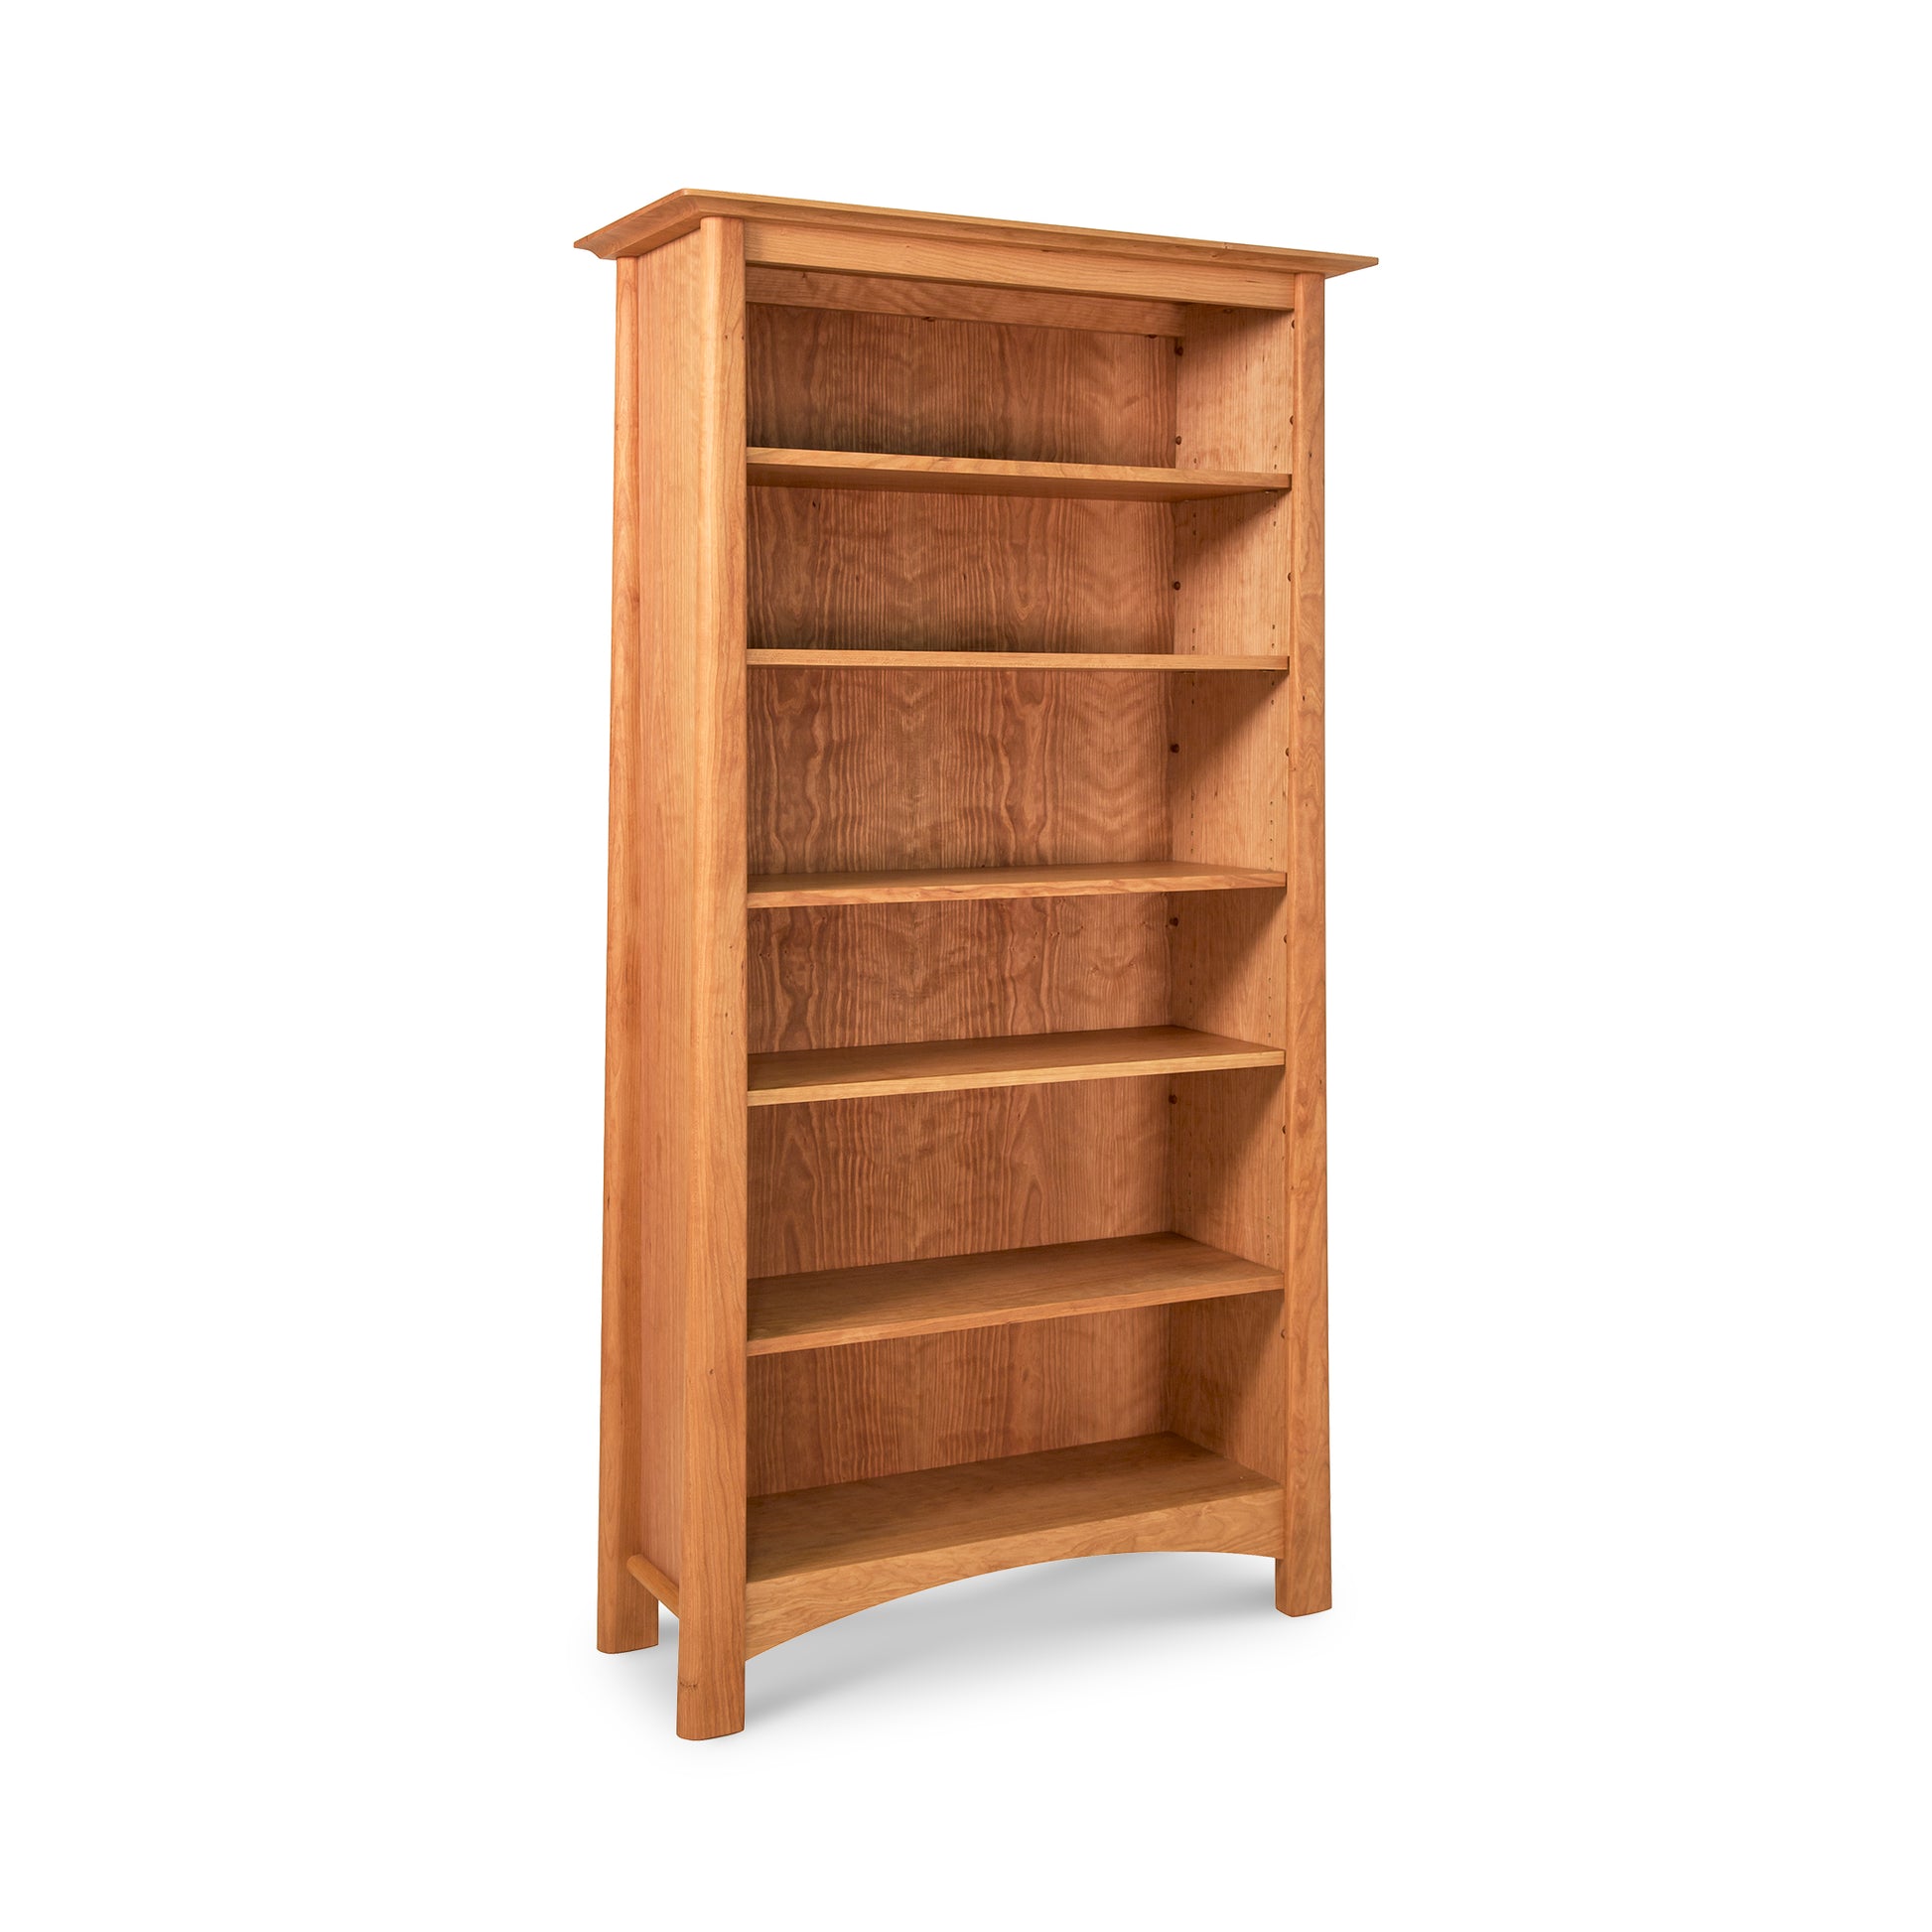 A Maple Corner Woodworks Cherry Moon bookcase with five shelves, isolated on a white background.